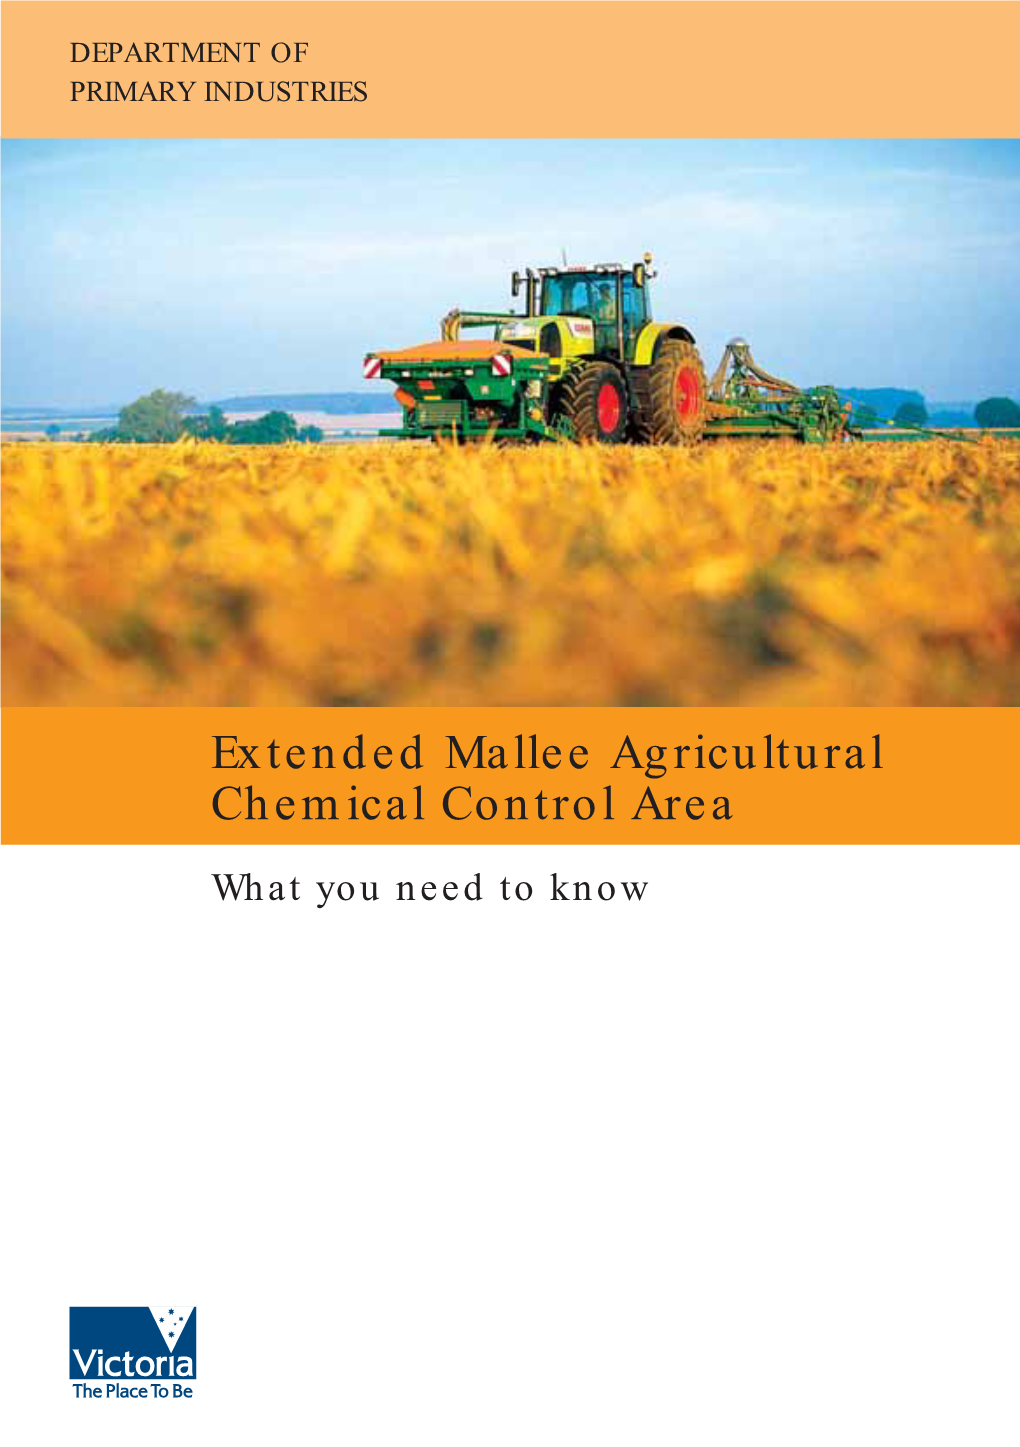 Extended Mallee Agricultural Chemical Control Area